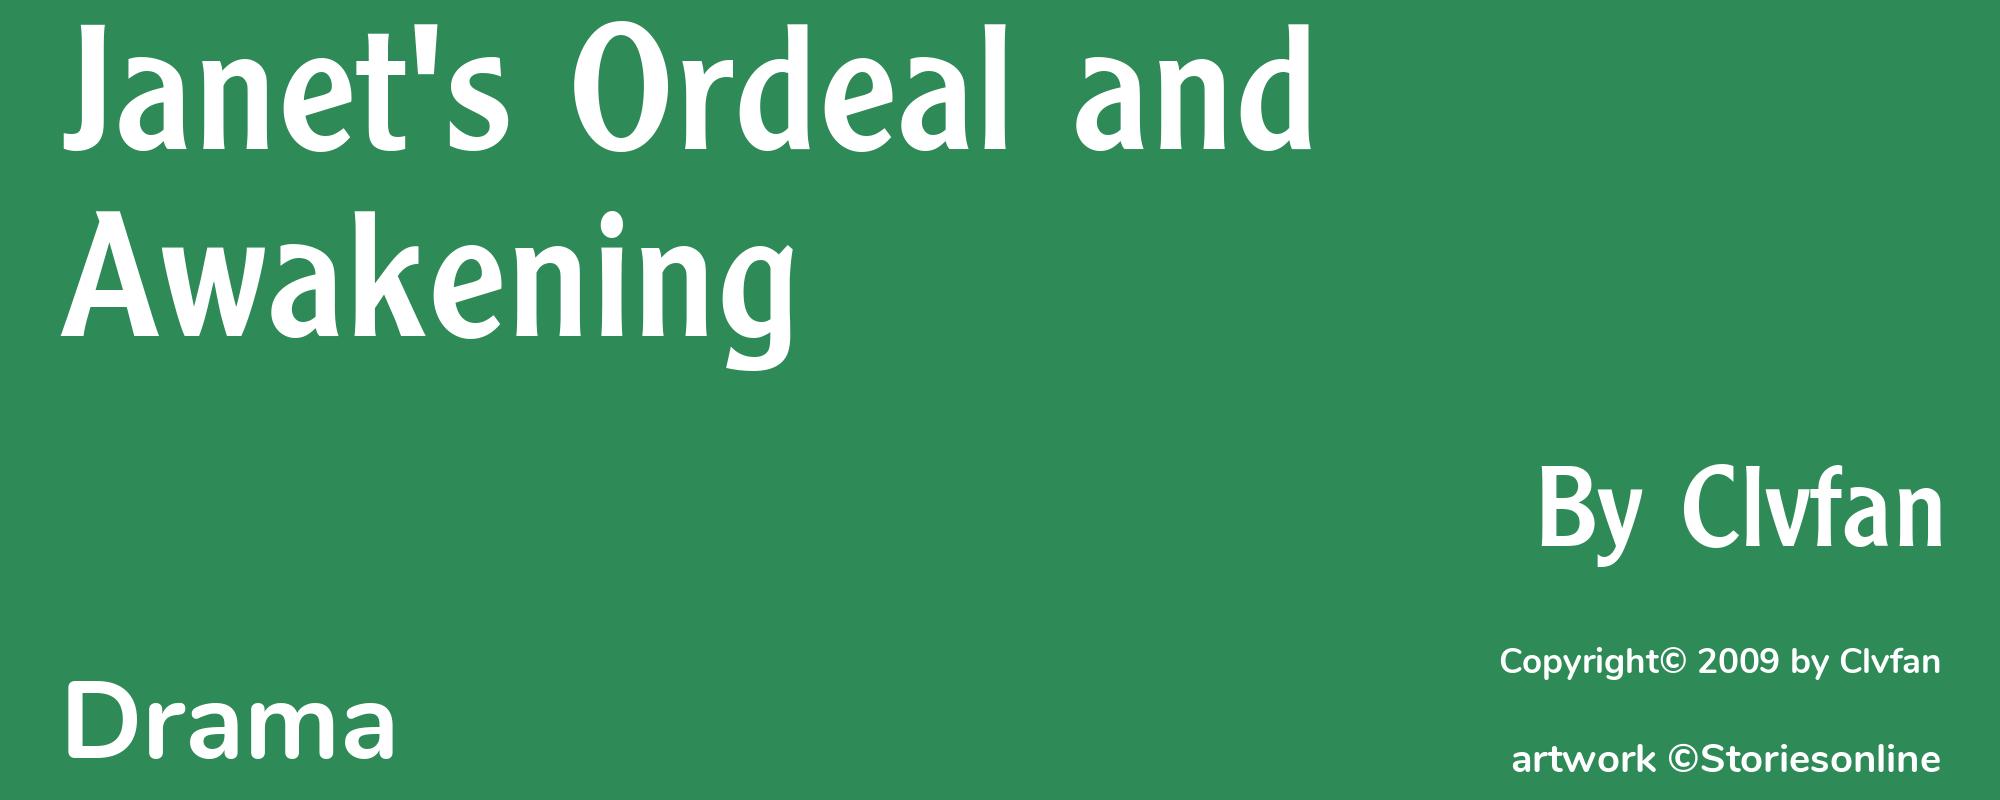 Janet's Ordeal and Awakening - Cover